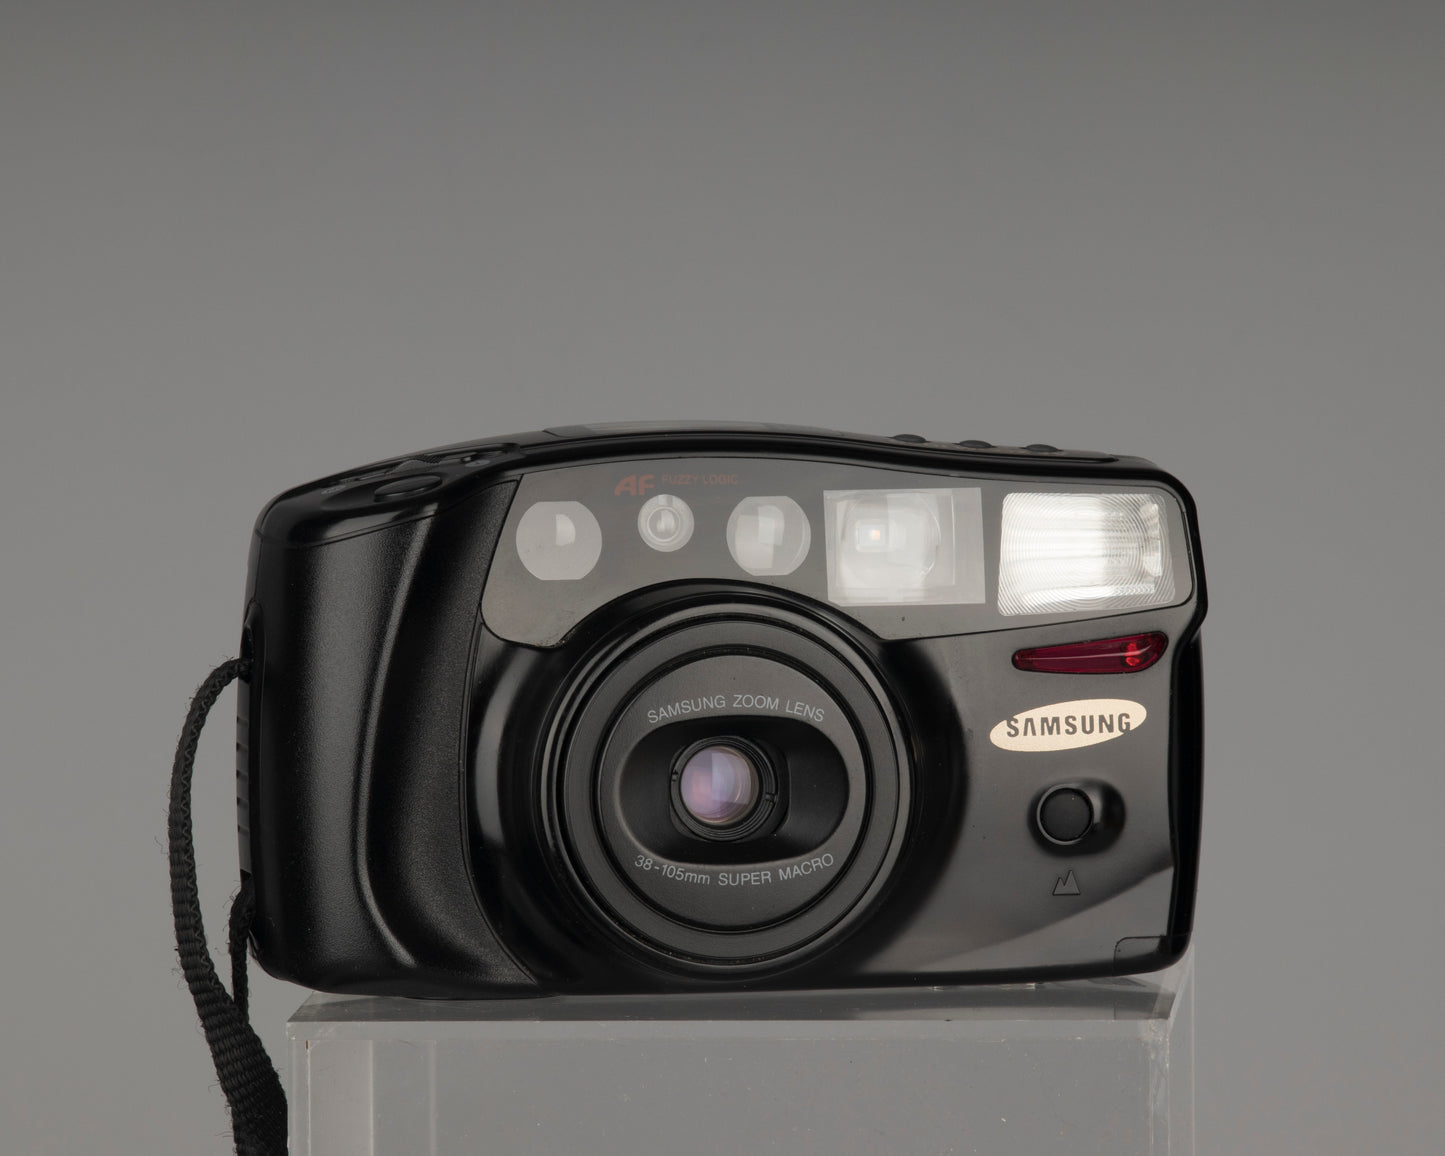 The Samsung AF Zoom 1050 is an advanced 35mm point-and-shoot camera from the 1990s with a 38-105mm zoom lens